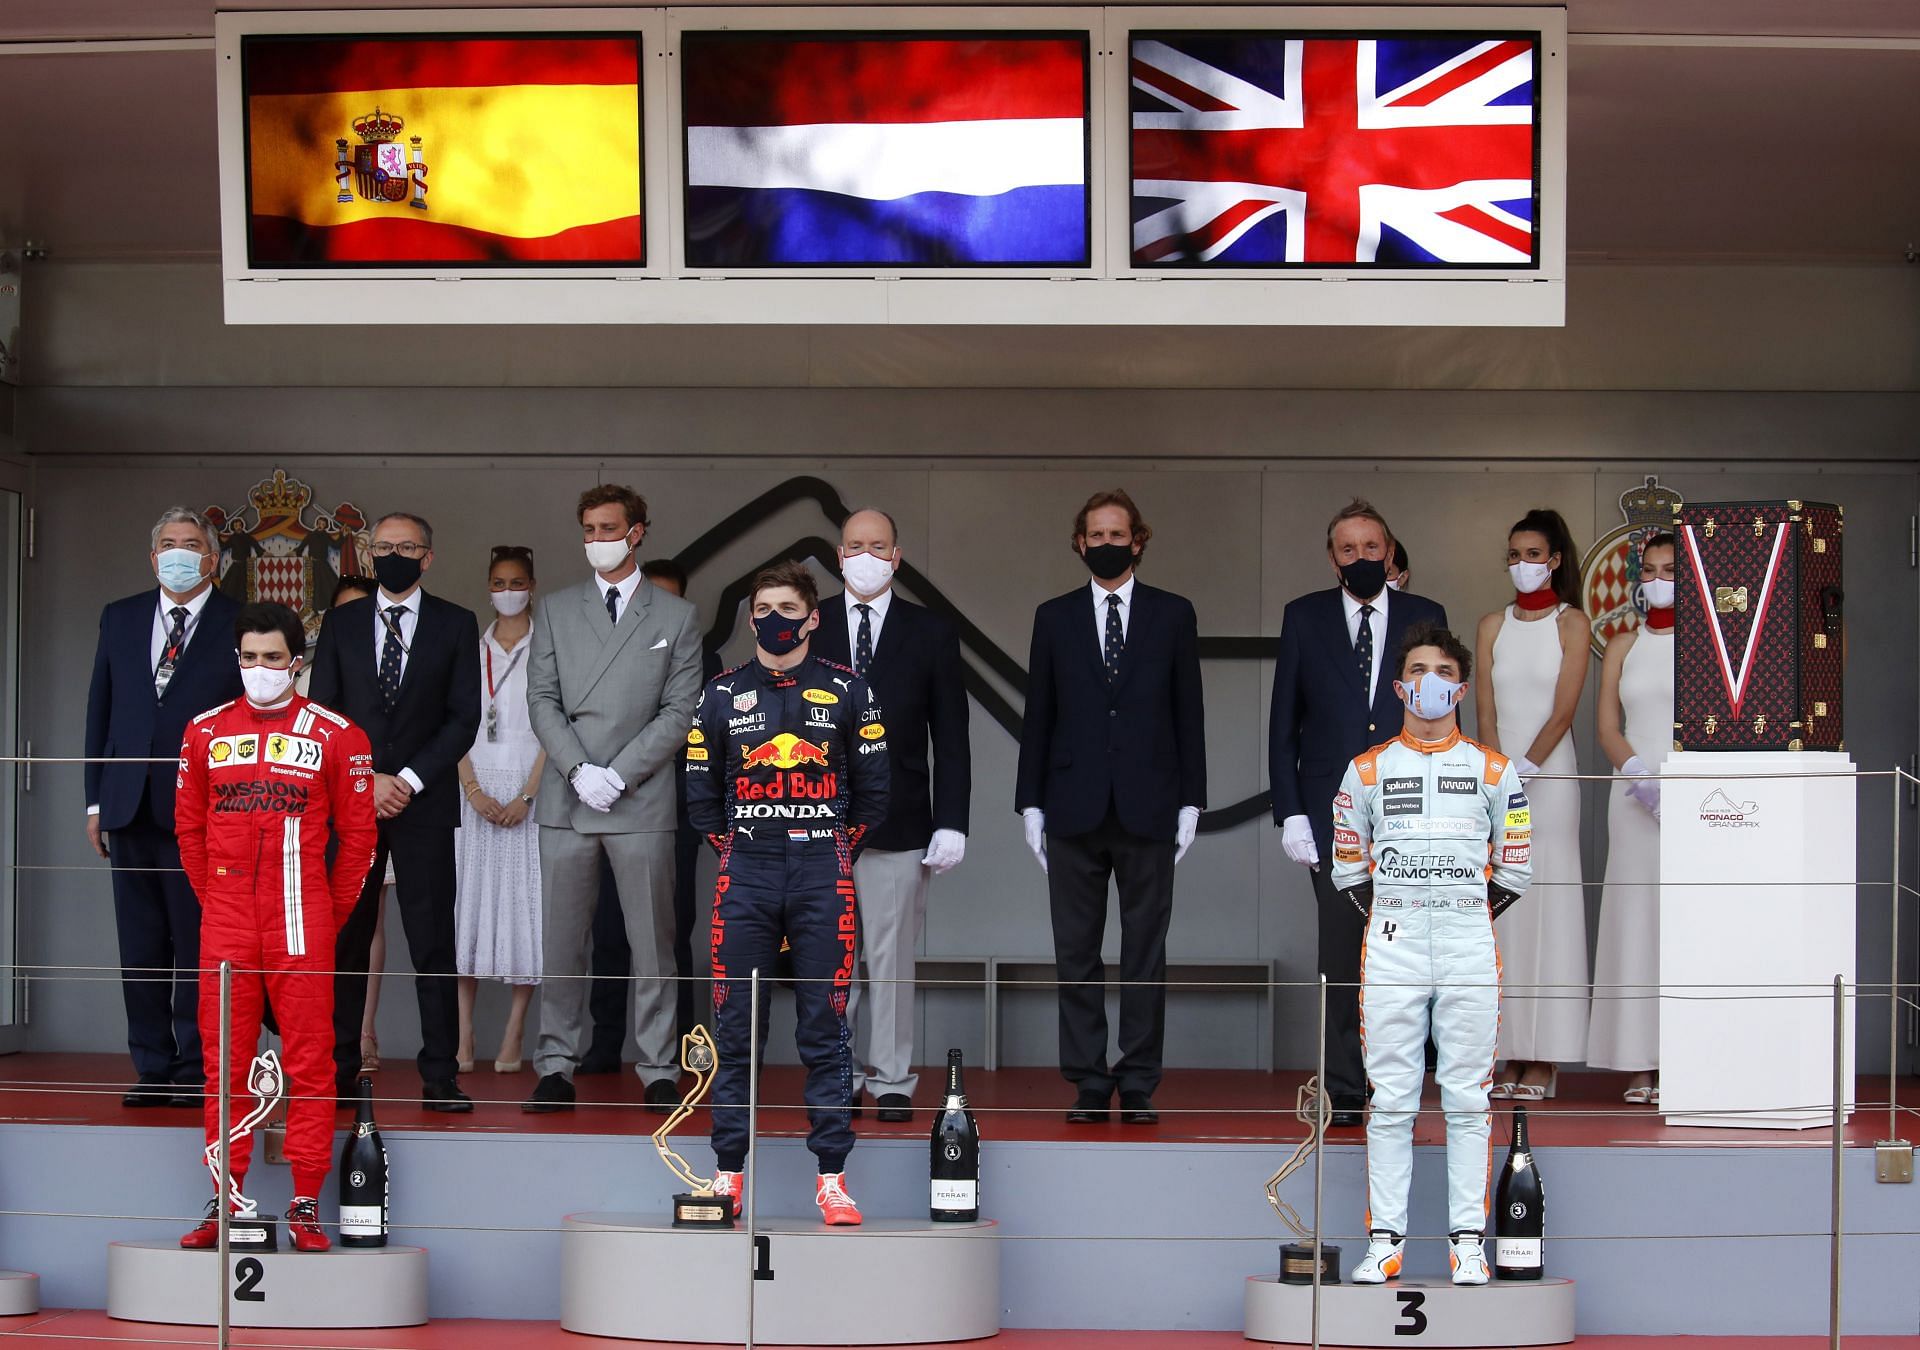 Red Bull, Ferrari, and Mercedes on the podium this time around?